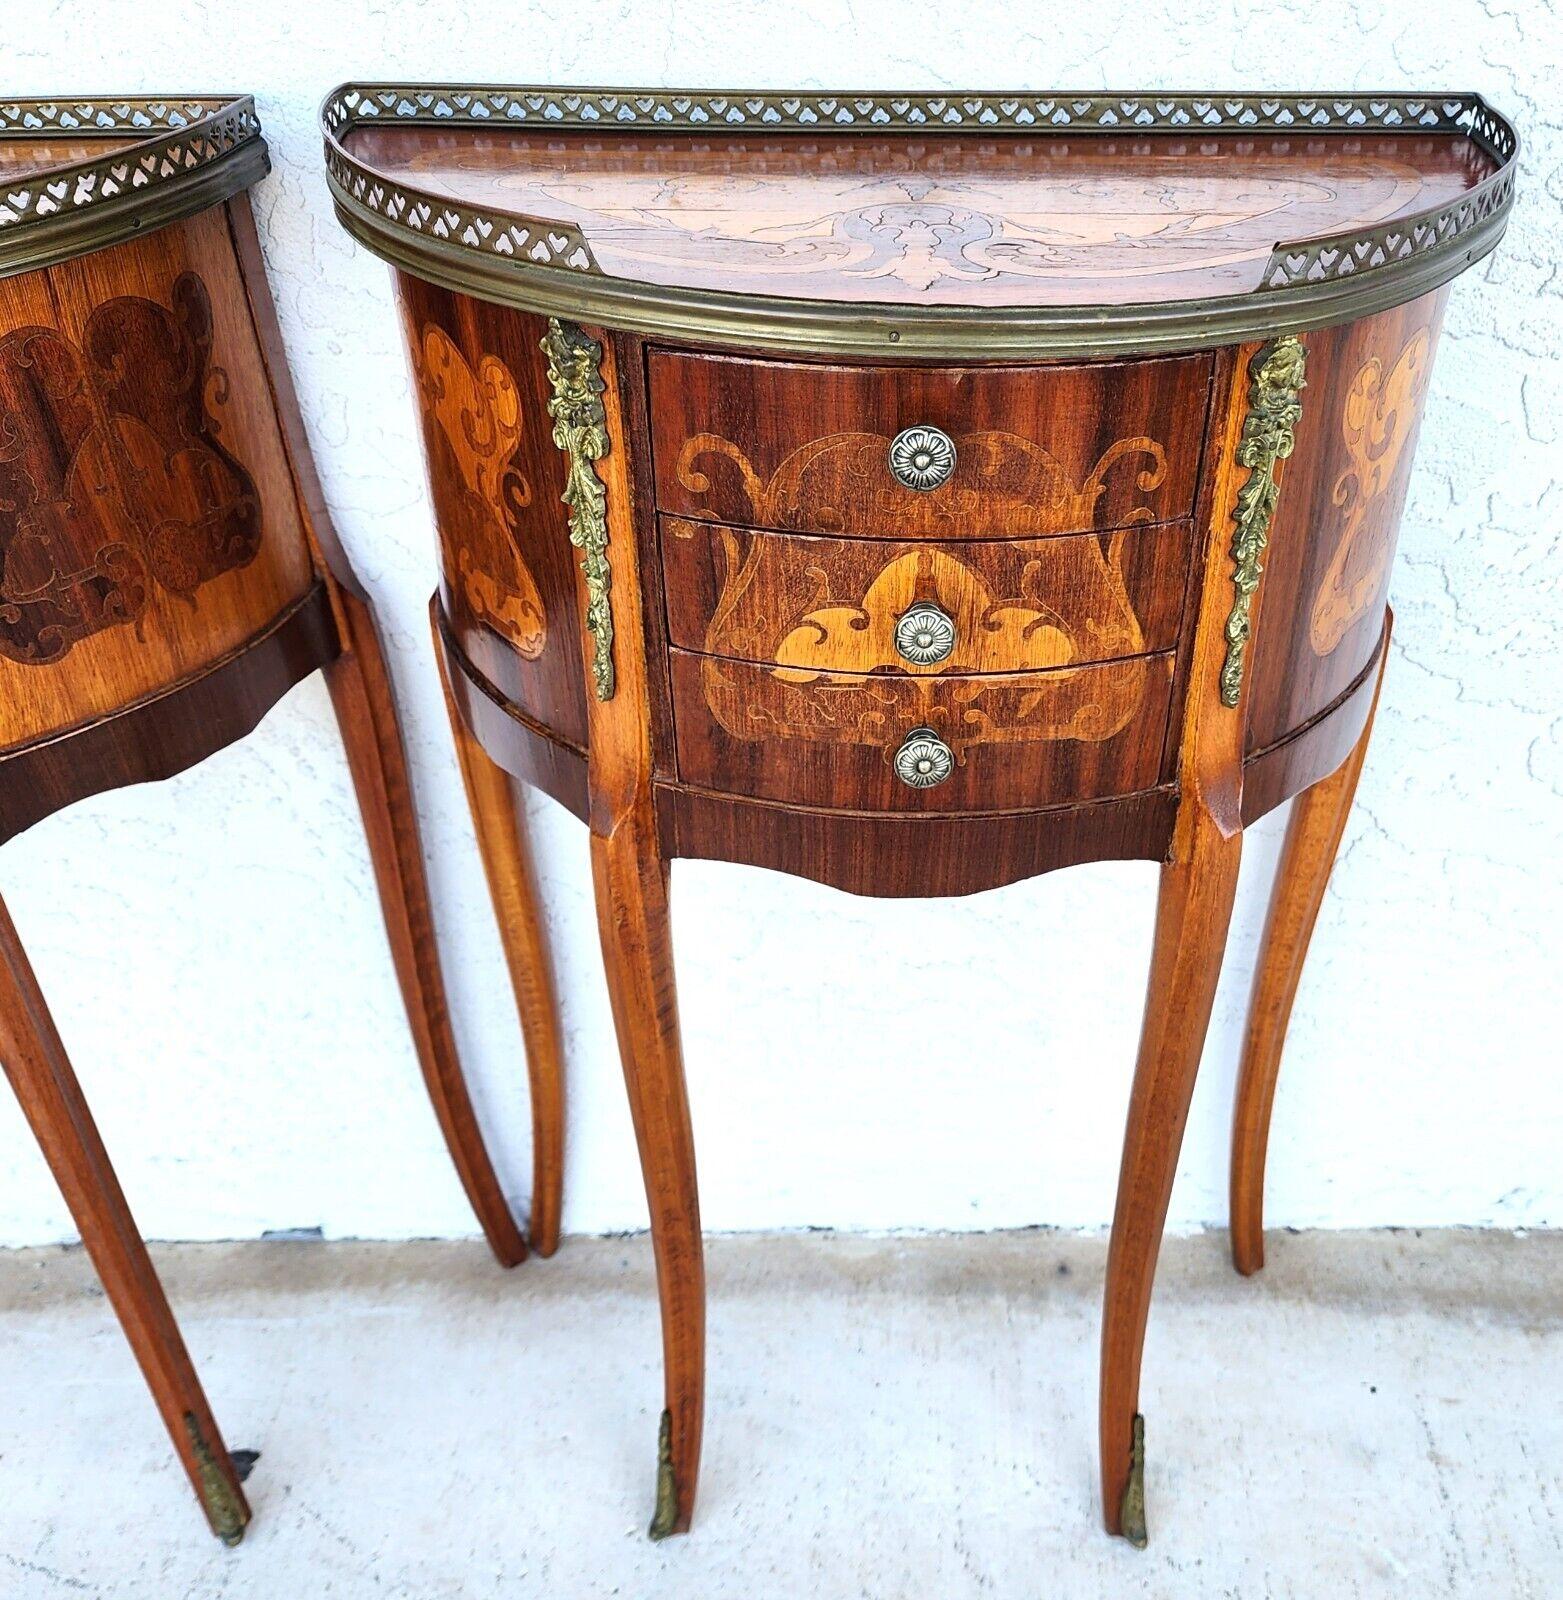 For FULL item description click on CONTINUE READING at the bottom of this page.

Offering One Of Our Recent Palm Beach Estate Fine Furniture Acquisitions Of A
Pair of French Louis XV Side Accent Bedside Tables
With inlaid marquetry designs, 3